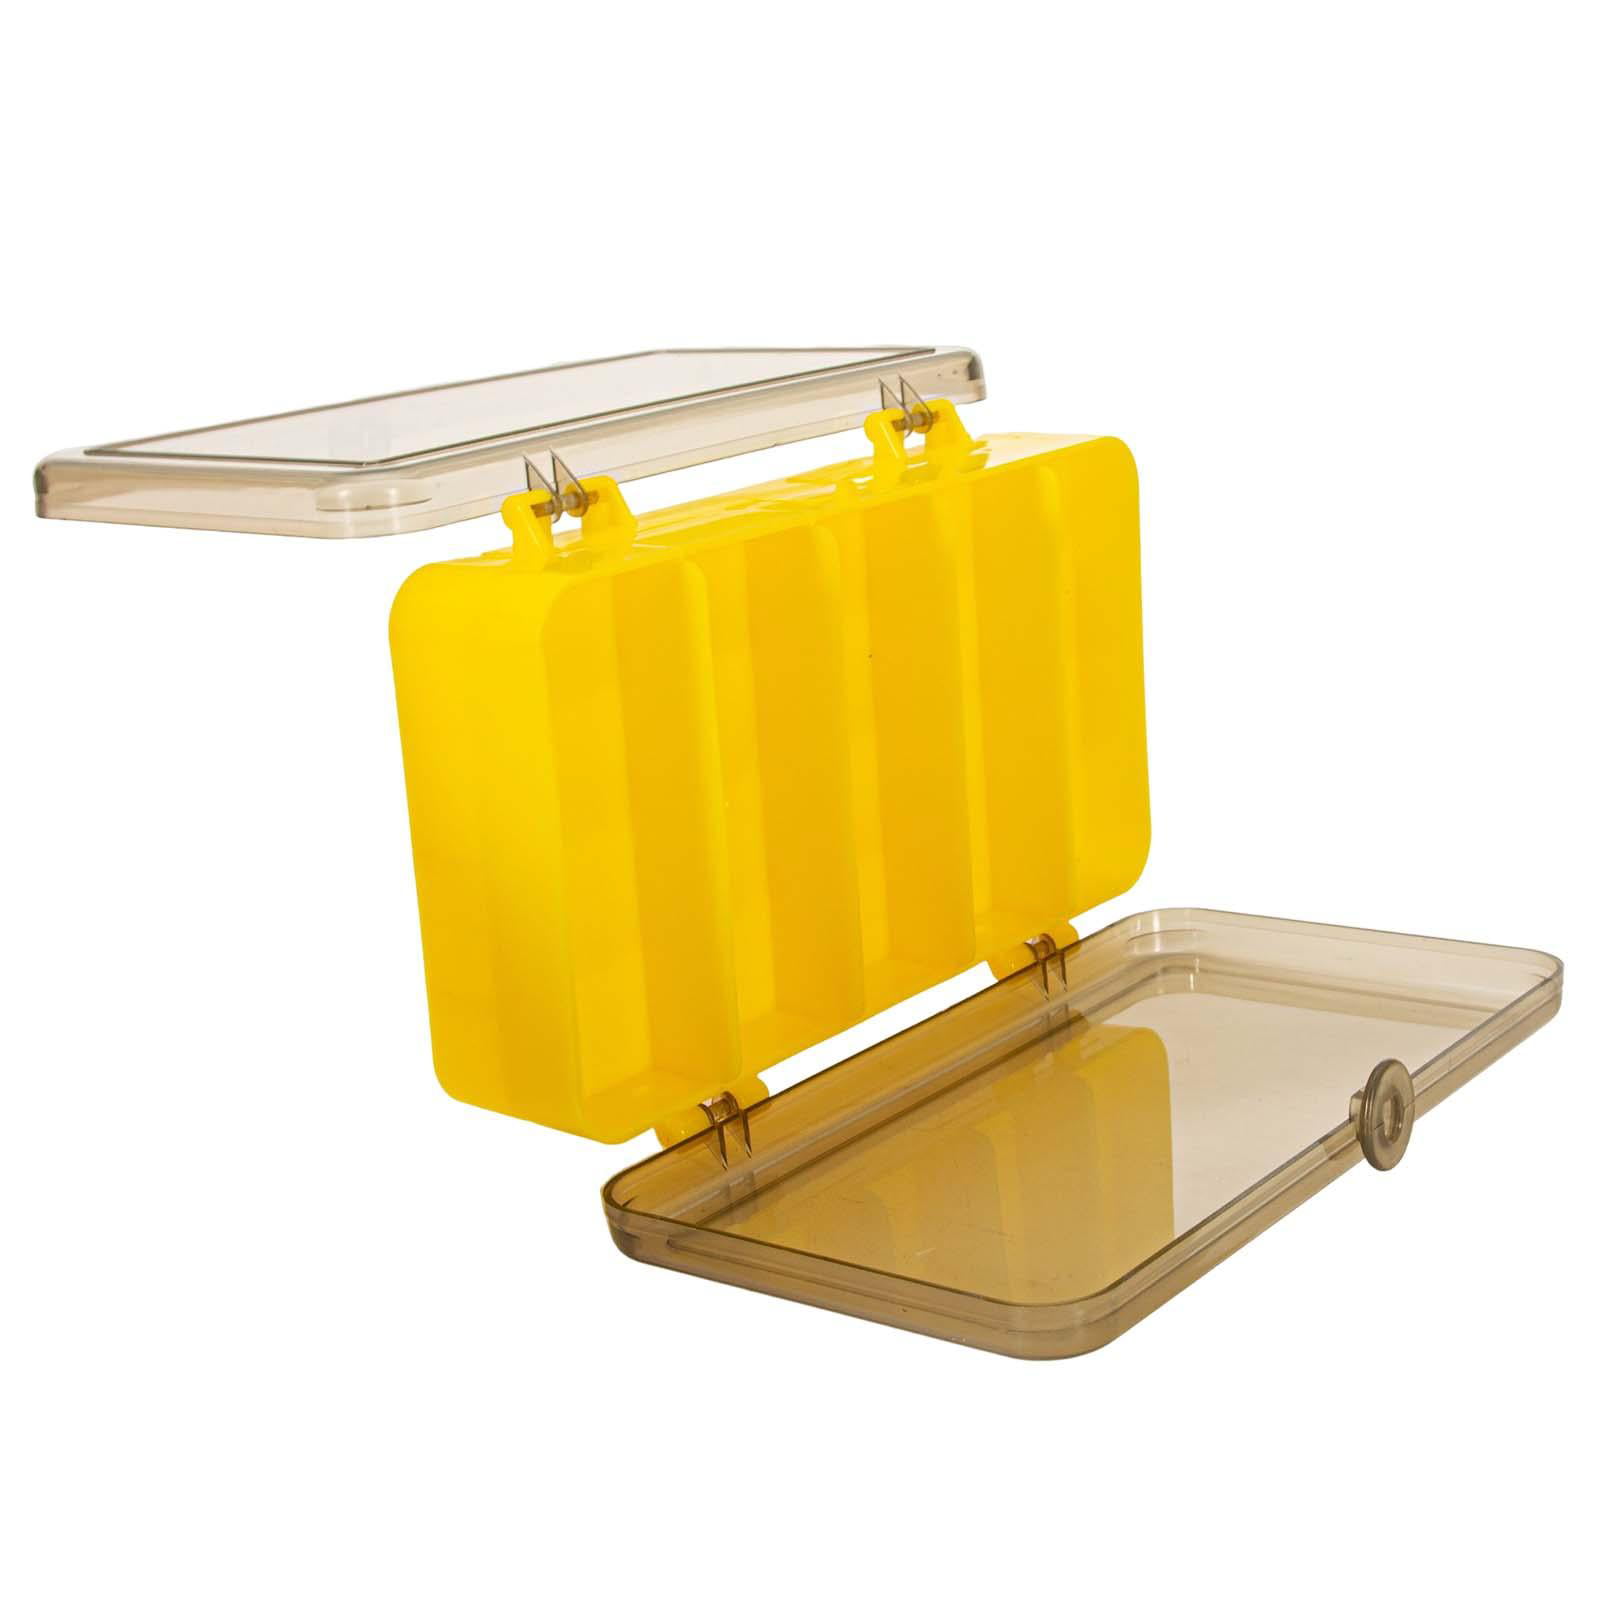 Tackle Box Fishing Tackle Storage Tray Fishing Case Organizer Durable Tackle Box Container Yellow 27x19x5cm, Size: Multi